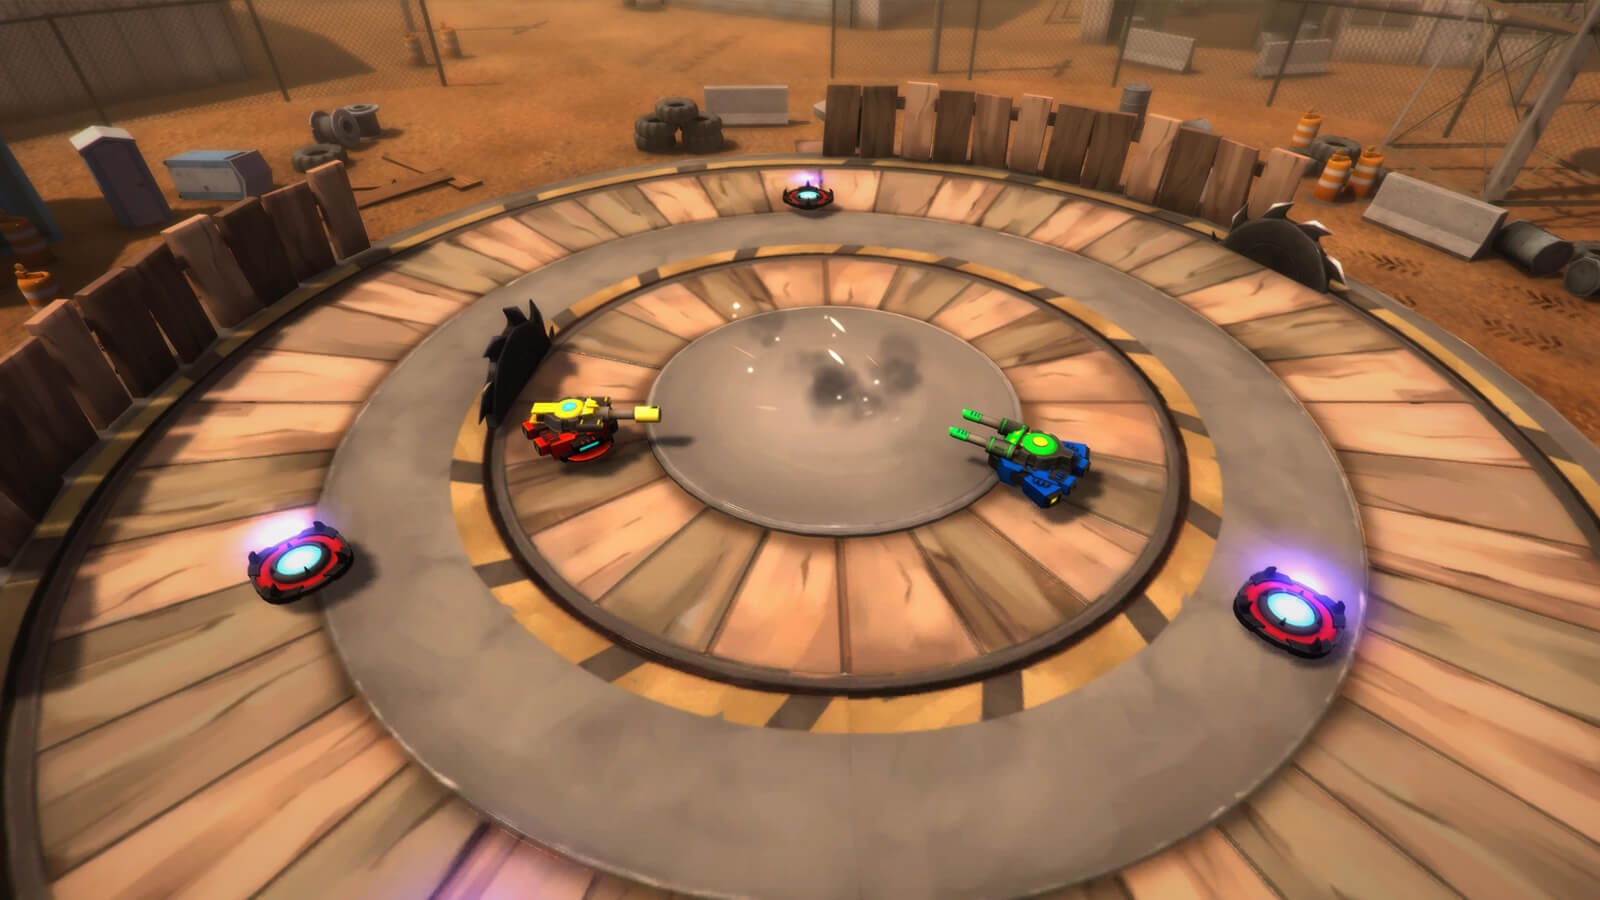 Two hover tanks face each other in a wooden battle arena with saw blades buzzing around them.